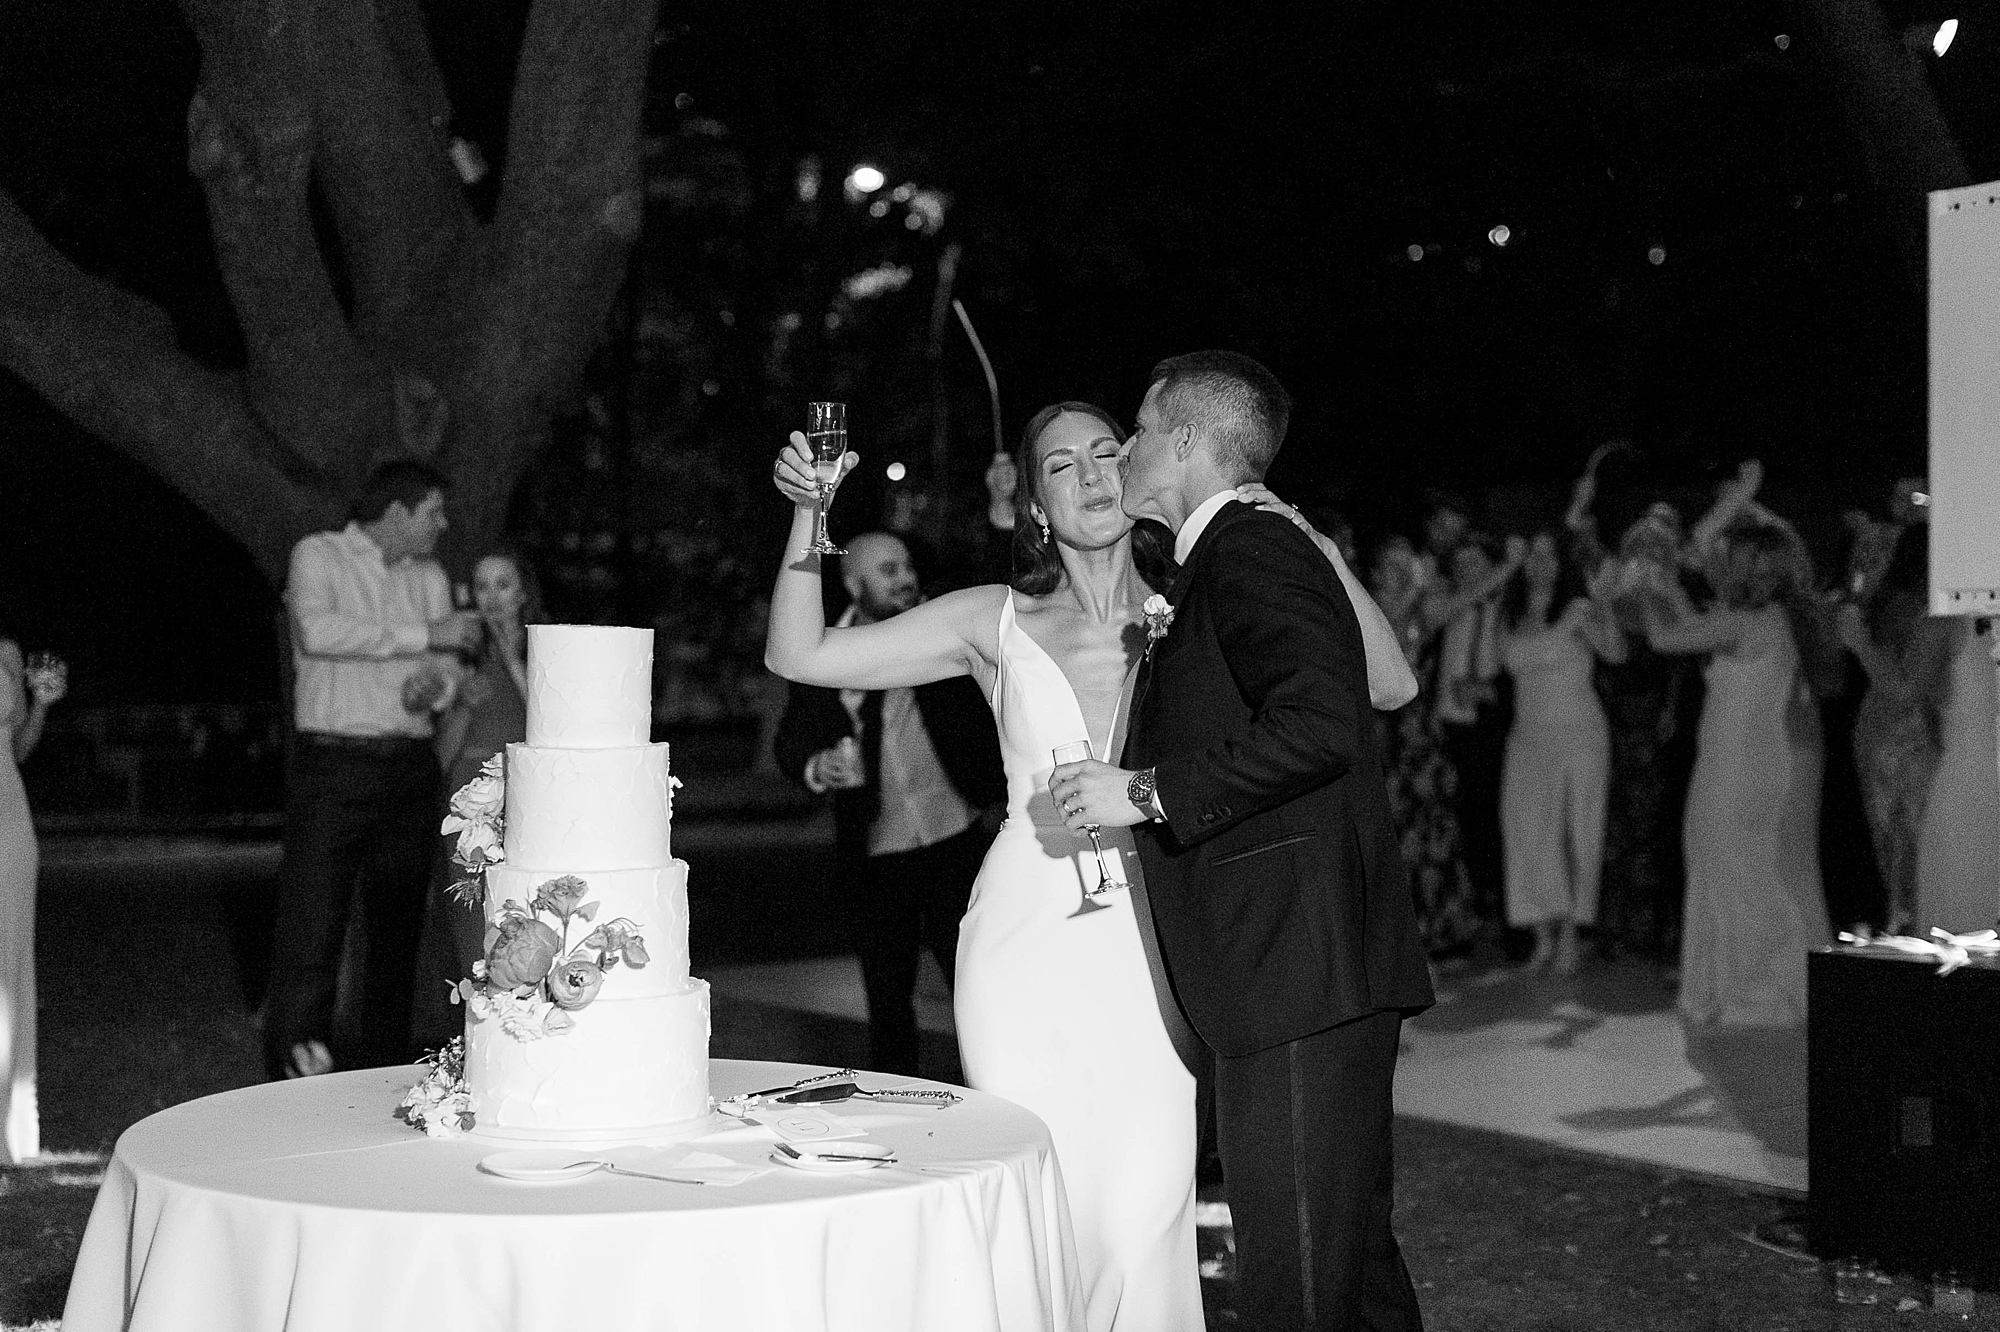 groom leans to kiss bride's cheek during cake cutting at al fresco wedding reception at the Nasher Sculpture Center